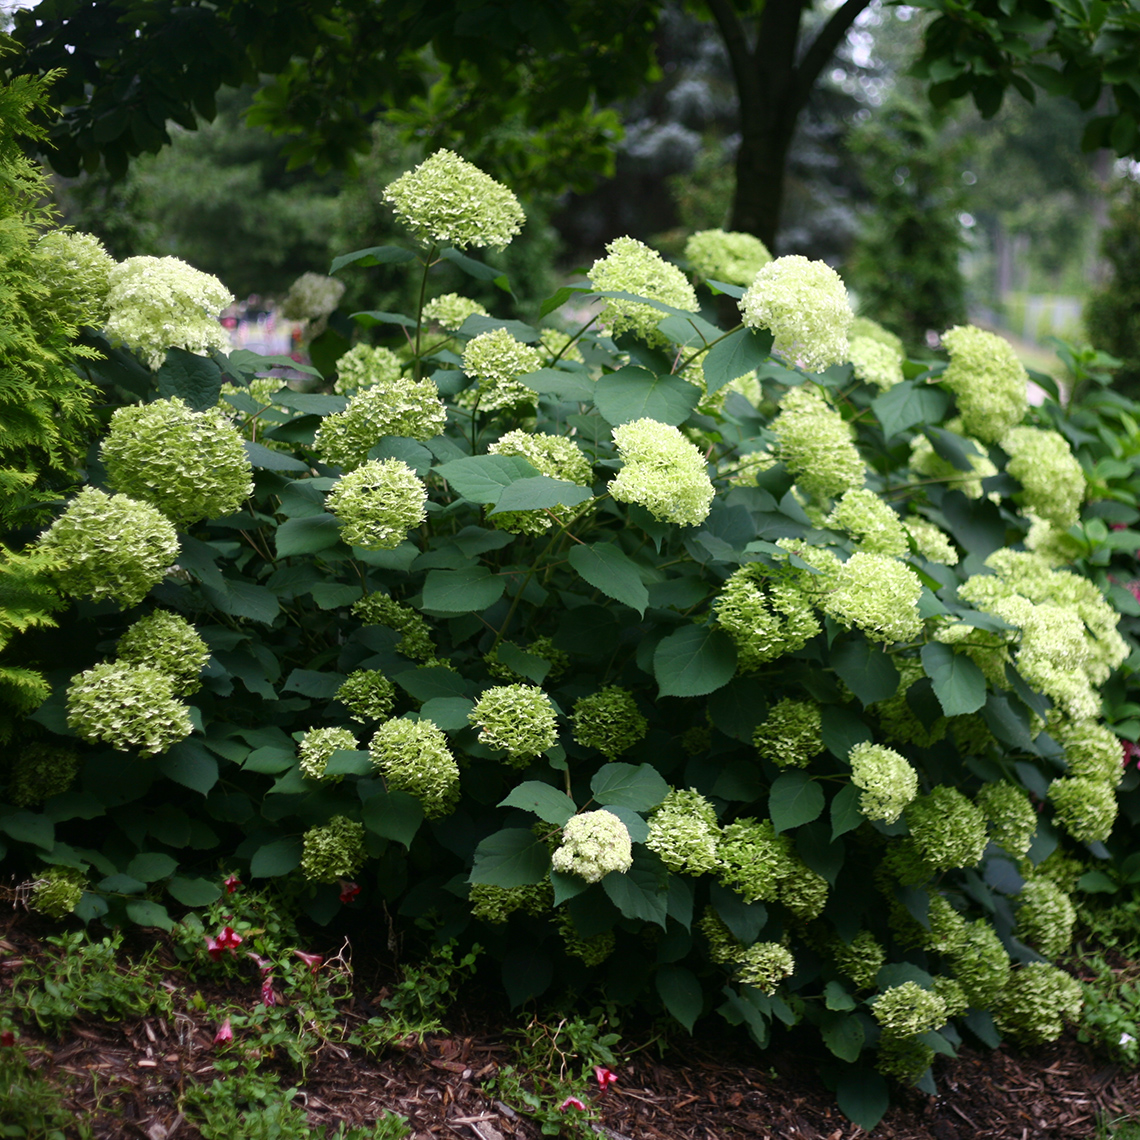 Specimen of Lime Rickey hydrangea in the landscape covered in green flowers